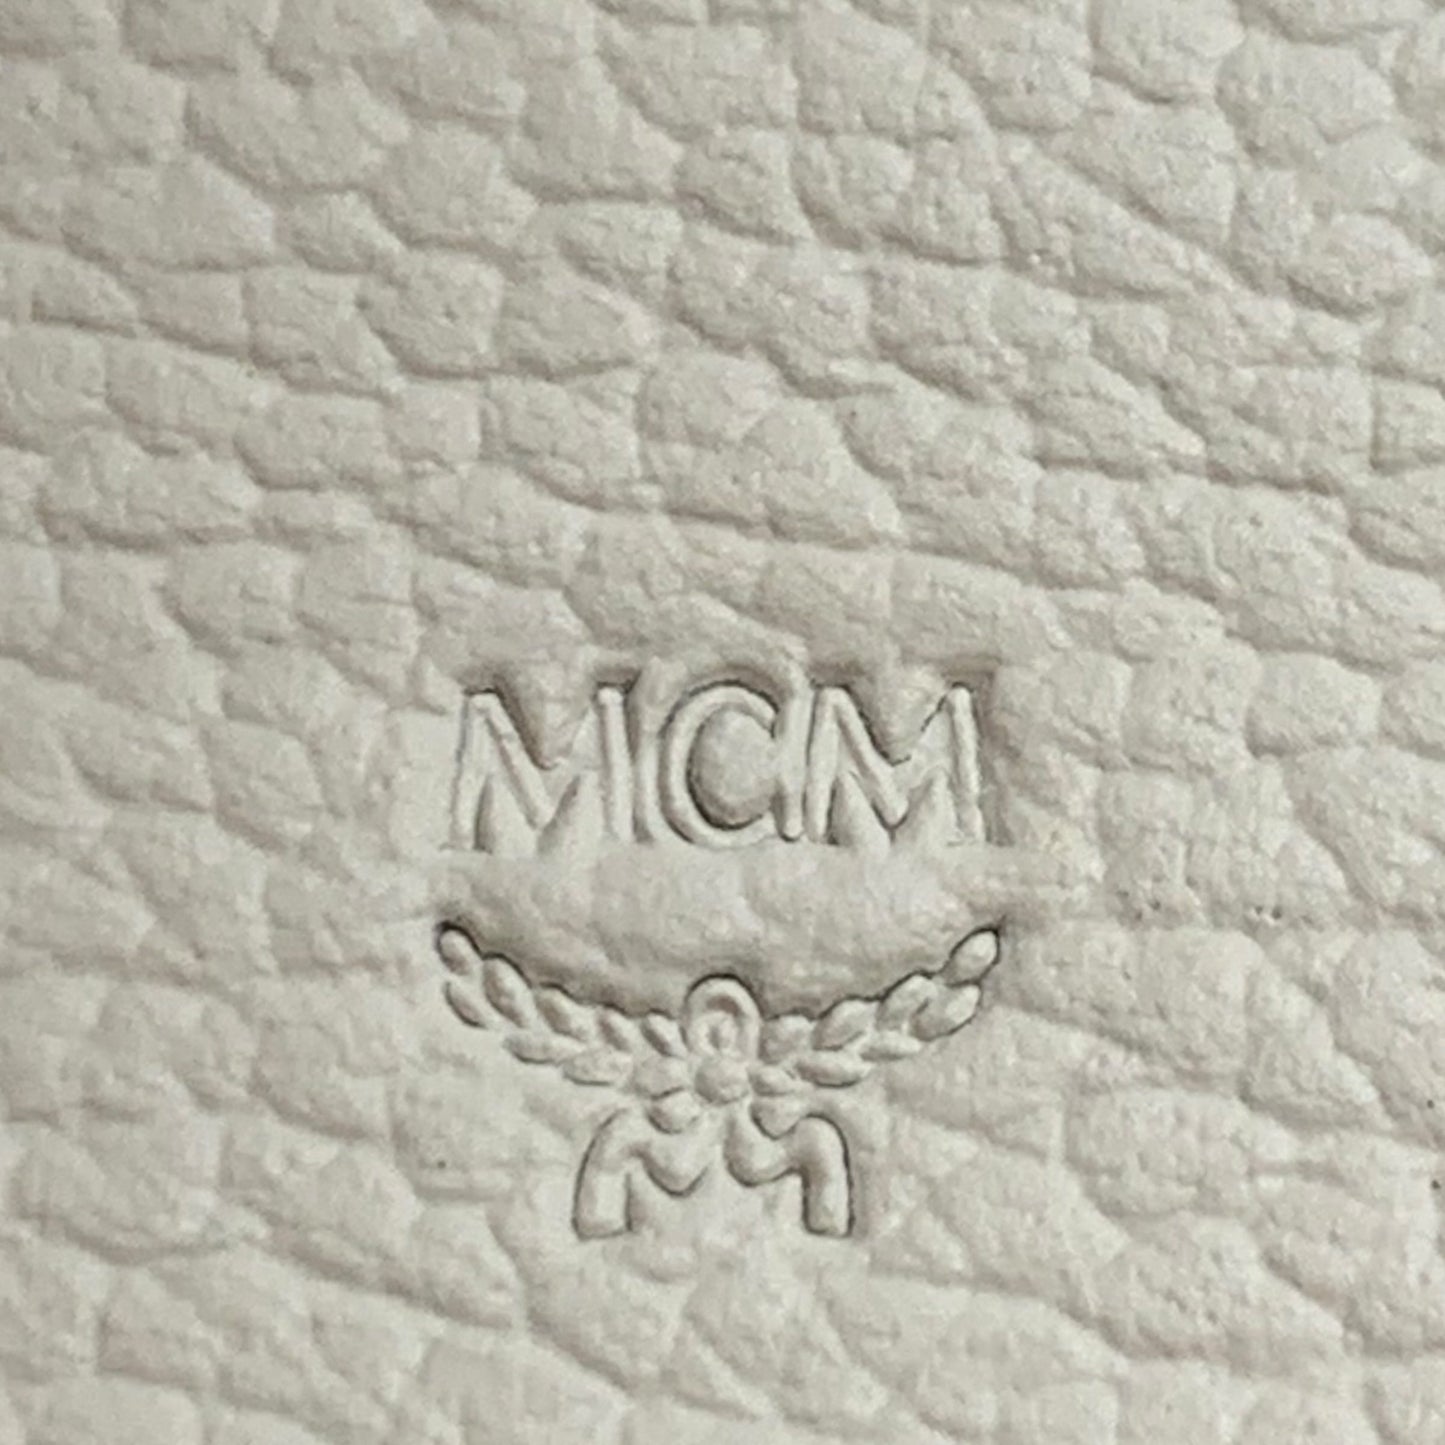 Wallet Designer By Mcm  Size: Small